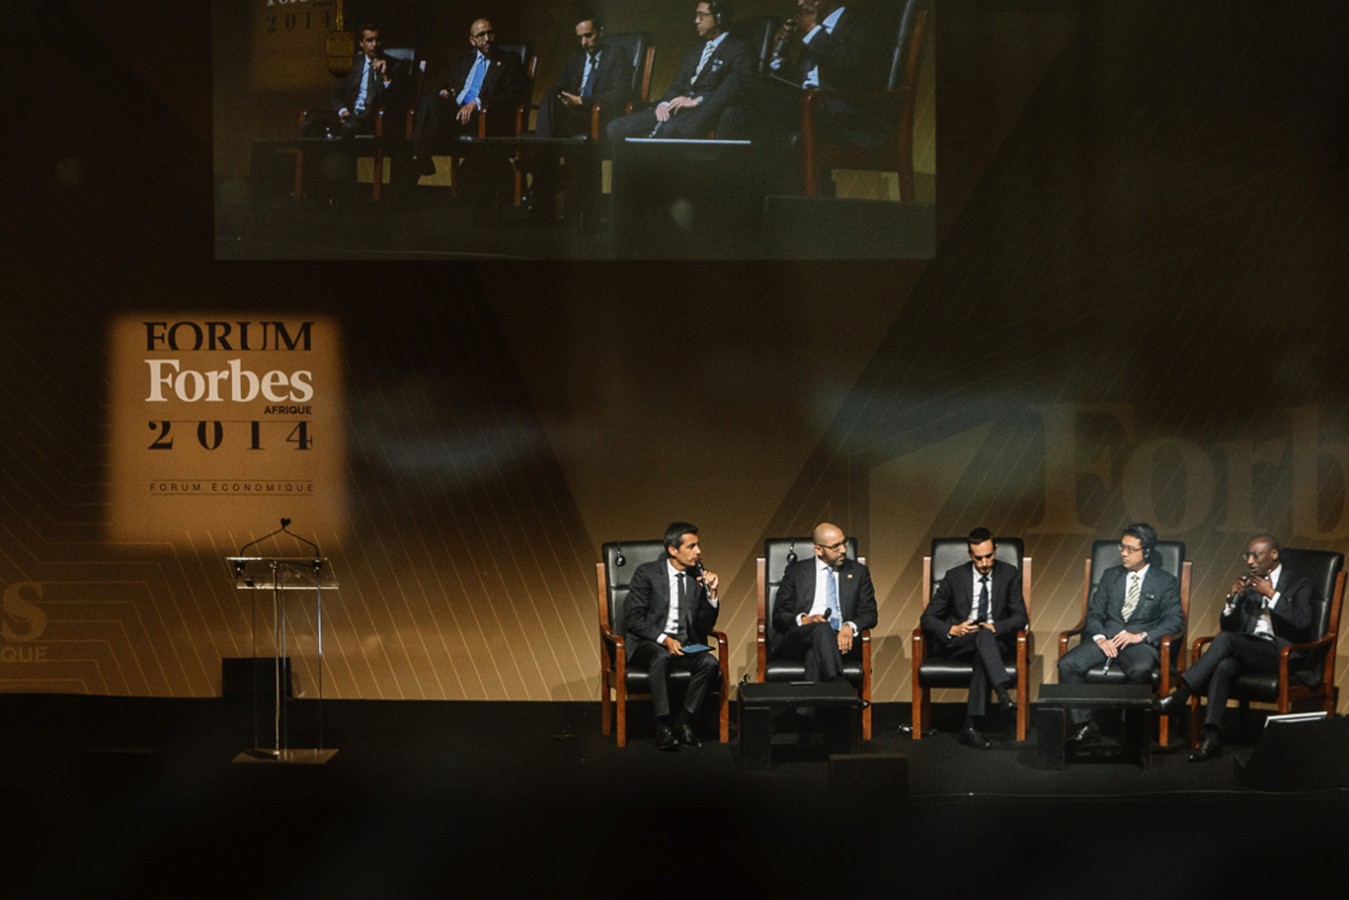 FORBES - Forum - Congo - 2014 - Agence HavasEvents